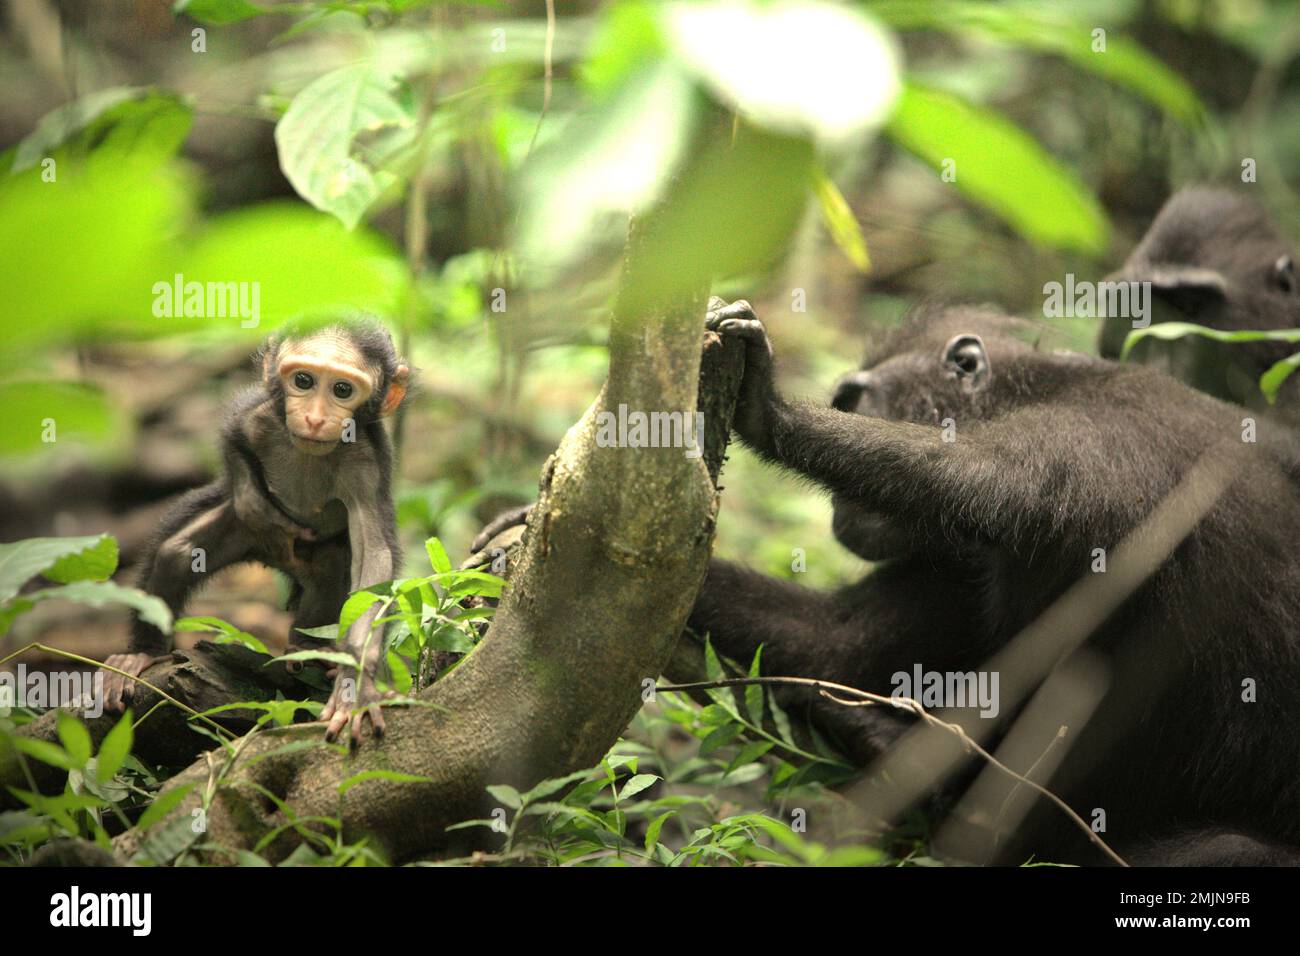 A curious infant of Sulawesi black-crested macaque (Macaca nigra) is moving away from its mother during weaning period in their natural habitat, lowland rainforest in Tangkoko Nature Reserve, North Sulawesi, Indonesia. Weaning period of a crested macaque infant—from 5 months of age until 1-year of age—is the earliest phase of life where infant mortality is the highest. Primate scientists from Macaca Nigra Project observed that '17 of the 78 infants (22%) disappeared in their first year of life. Eight of these 17 infants' dead bodies were found with large puncture wounds.' Meanwhile, climate... Stock Photo